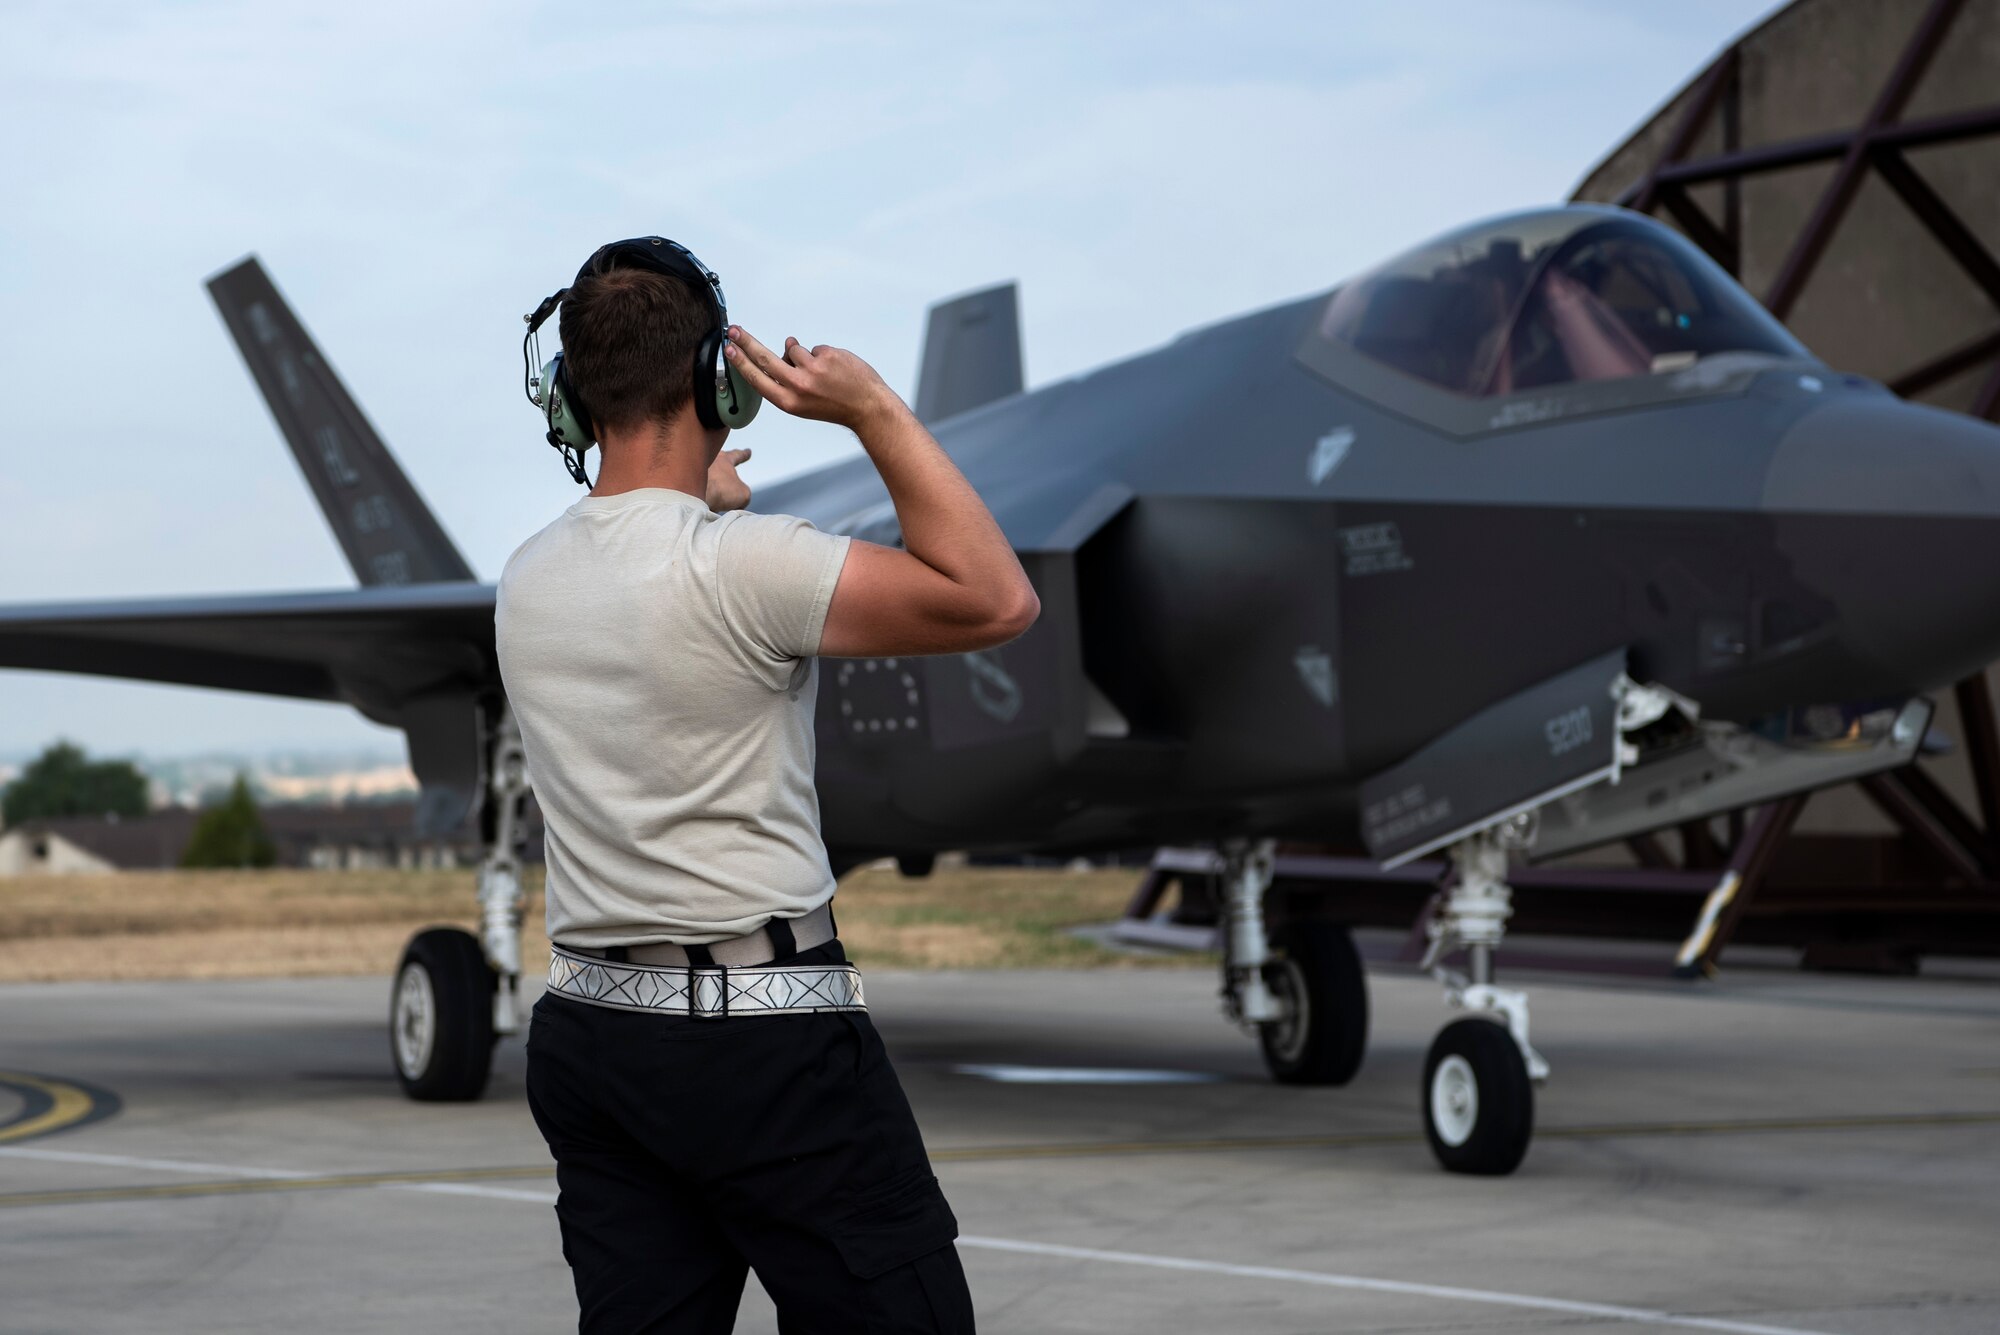 U.S. Air Force Airman 1st Class Cody Albert, 421st Fighter Squadron crew chief, marshals an F-35A Lightning II during Operation Rapid Forge at Spangdahlem Air Base, Germany, July 18, 2019. Rapid Forge aircraft are forward deploying to the territory of NATO allies to improve interoperability. The goal of the operation is to increase the readiness and responsiveness of U.S. forces in Europe and assist allies to increase regional security. (U.S. Air Force photo by Airman 1st Class Valerie Seelye)